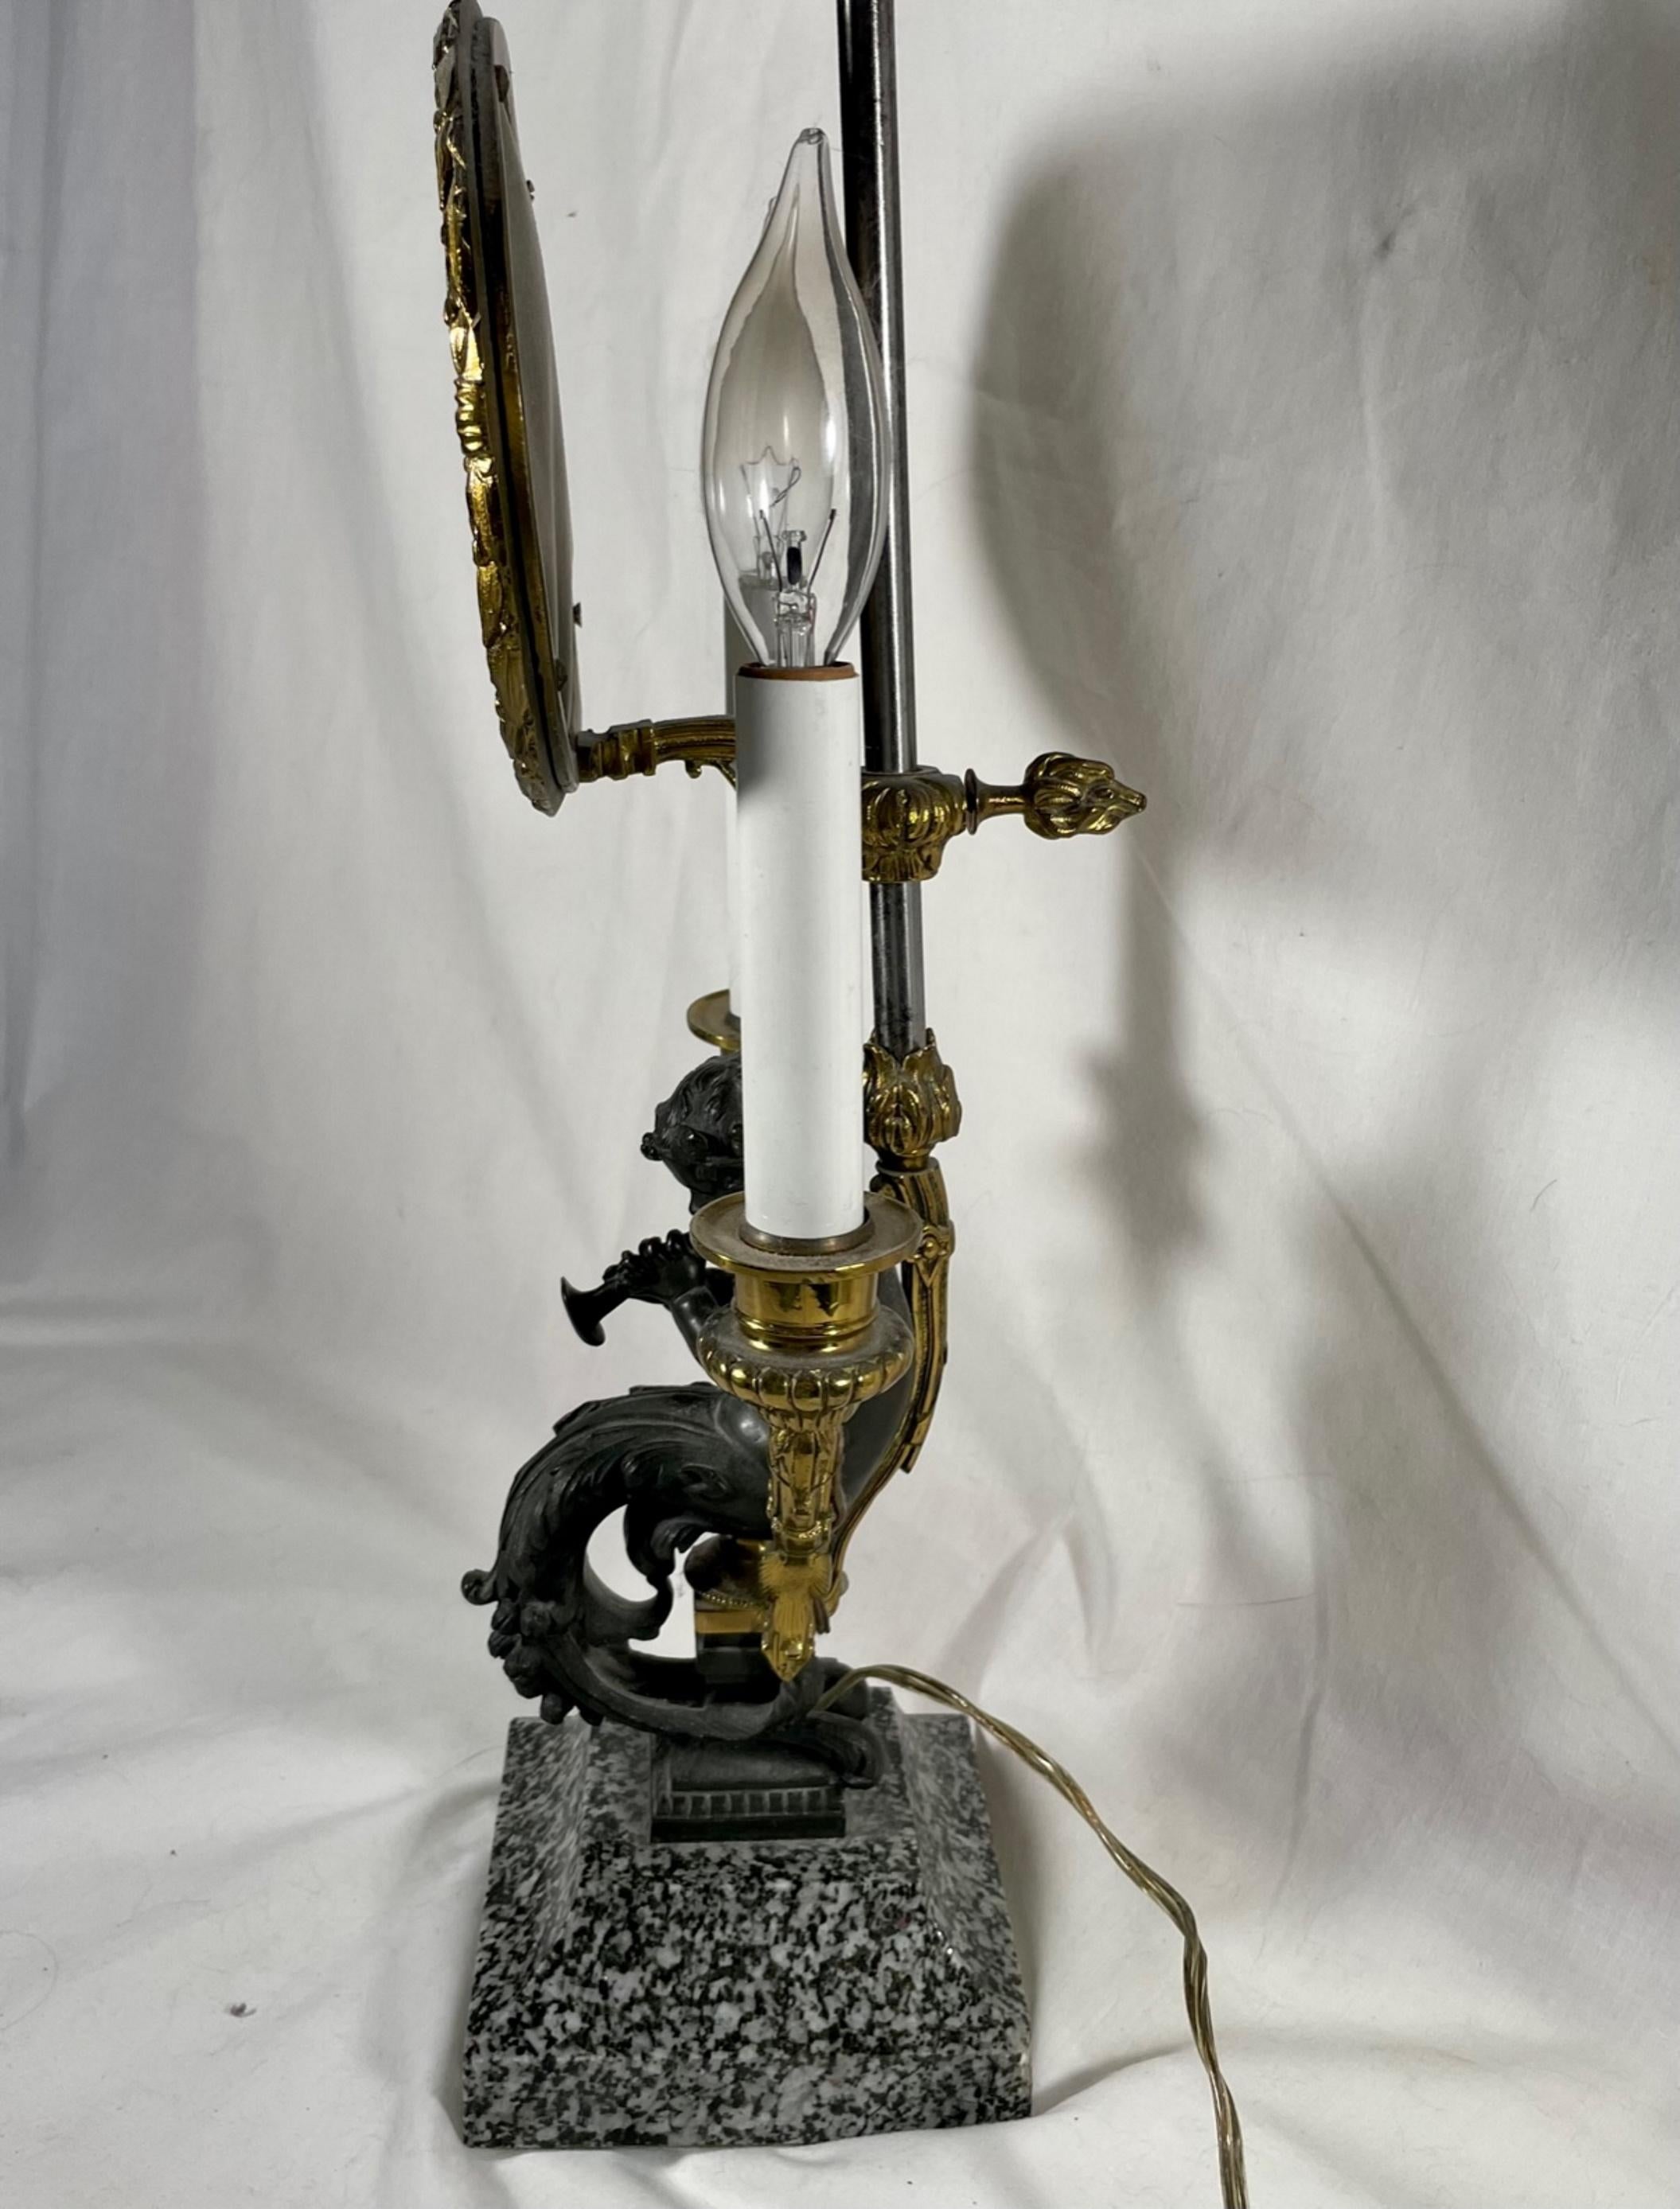 19th C. Louis XV Style Bronze Two Light Table Lamp with Adjustable “Pare-feu